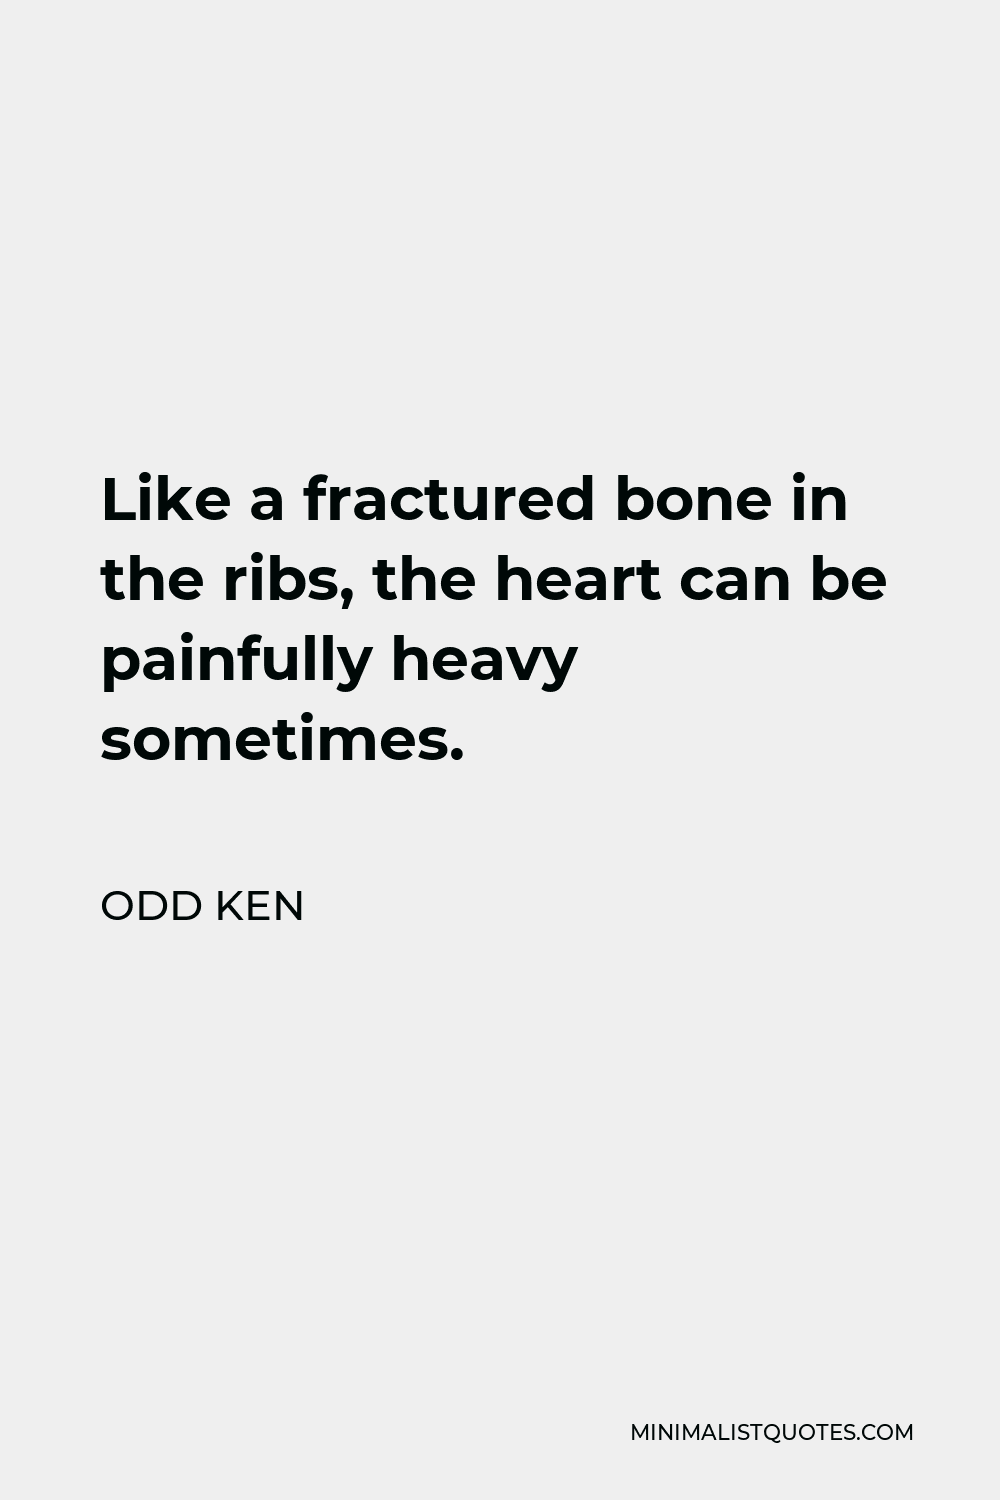 Odd Ken Quote - Like a fractured bone in the ribs, the heart can be painfully heavy sometimes.